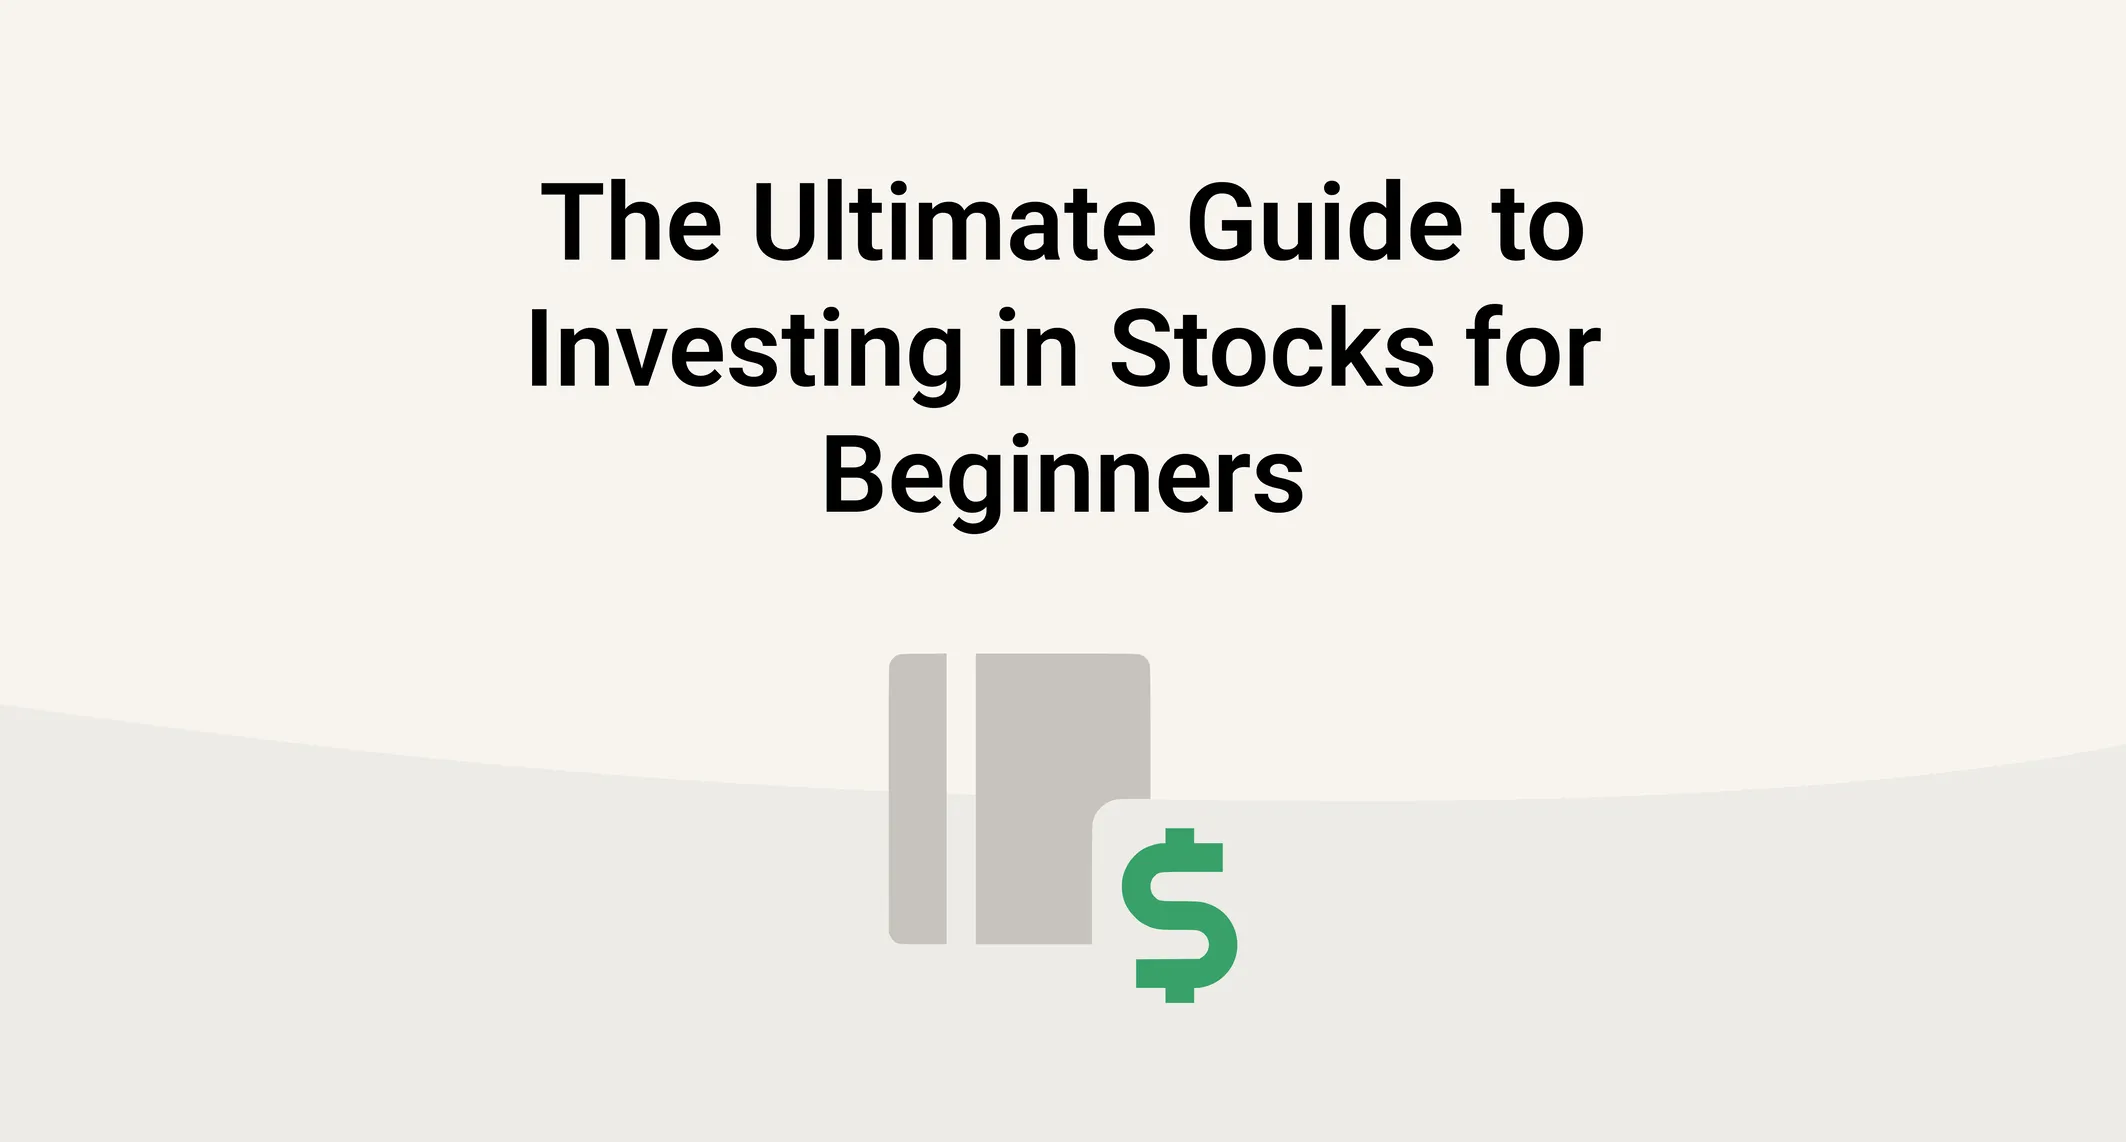 The Ultimate Guide to Investing in Stocks for Beginners